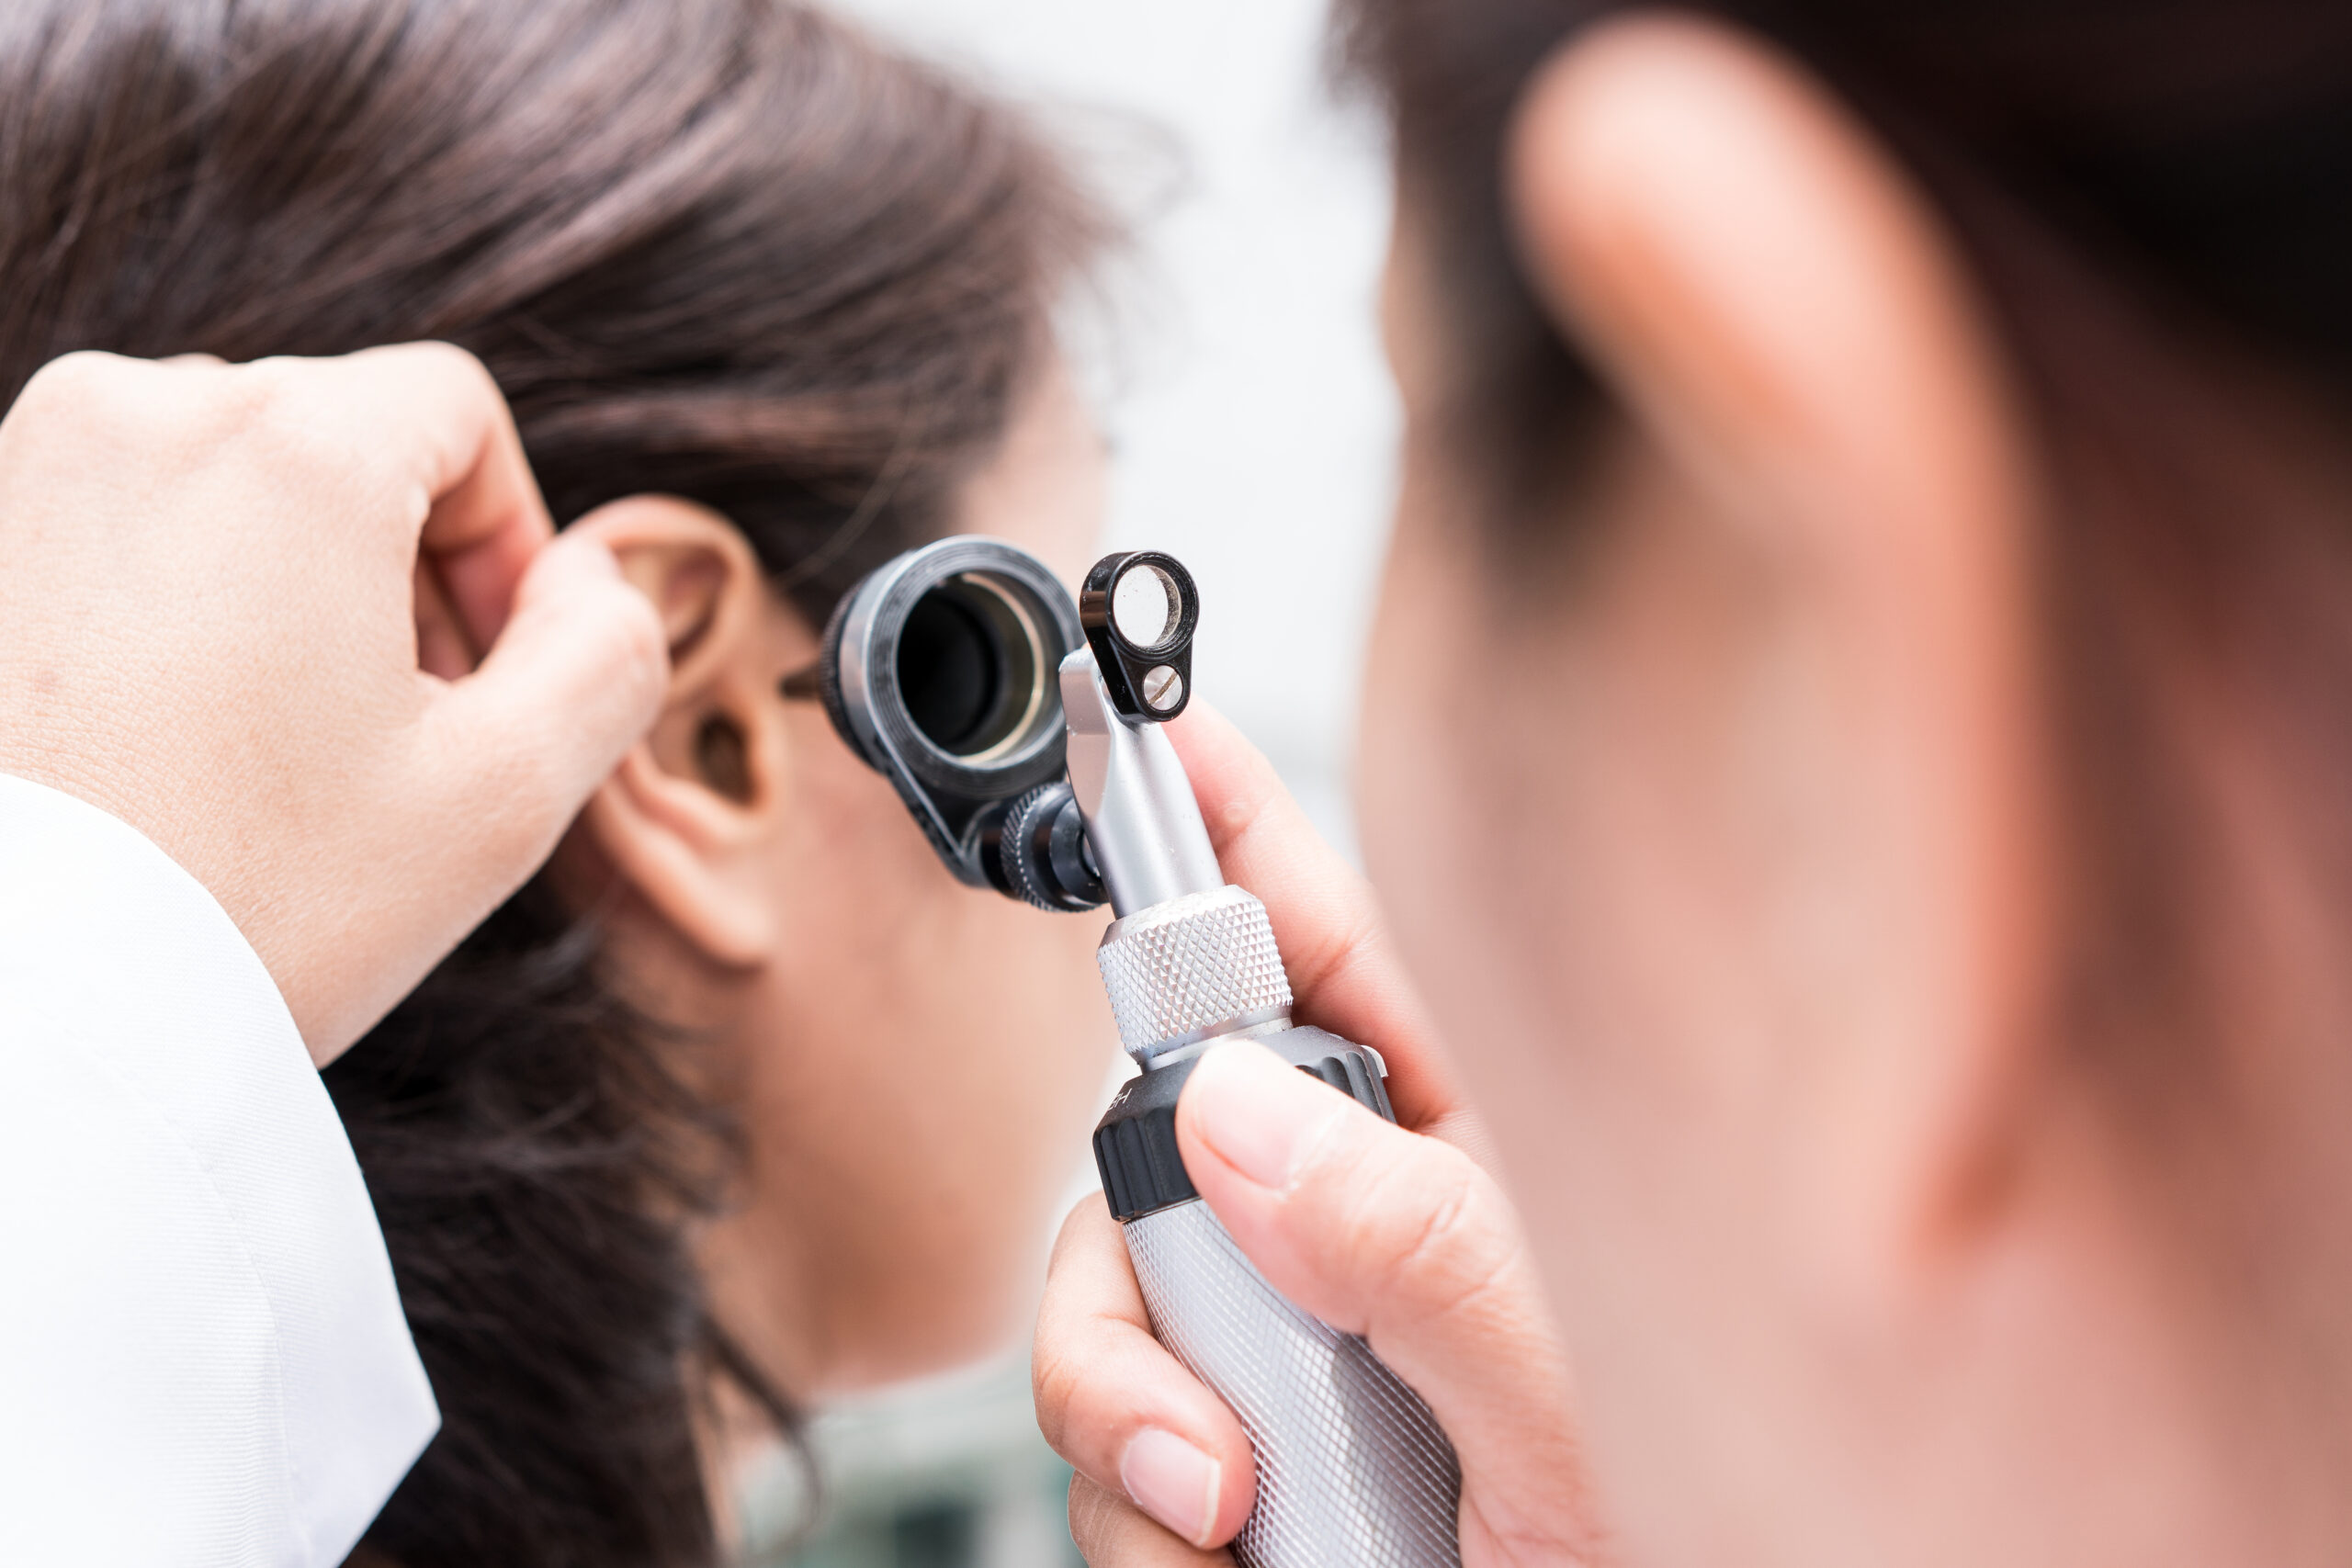 Doctor examined the patient’s ear with Otoscope. Patient seem to